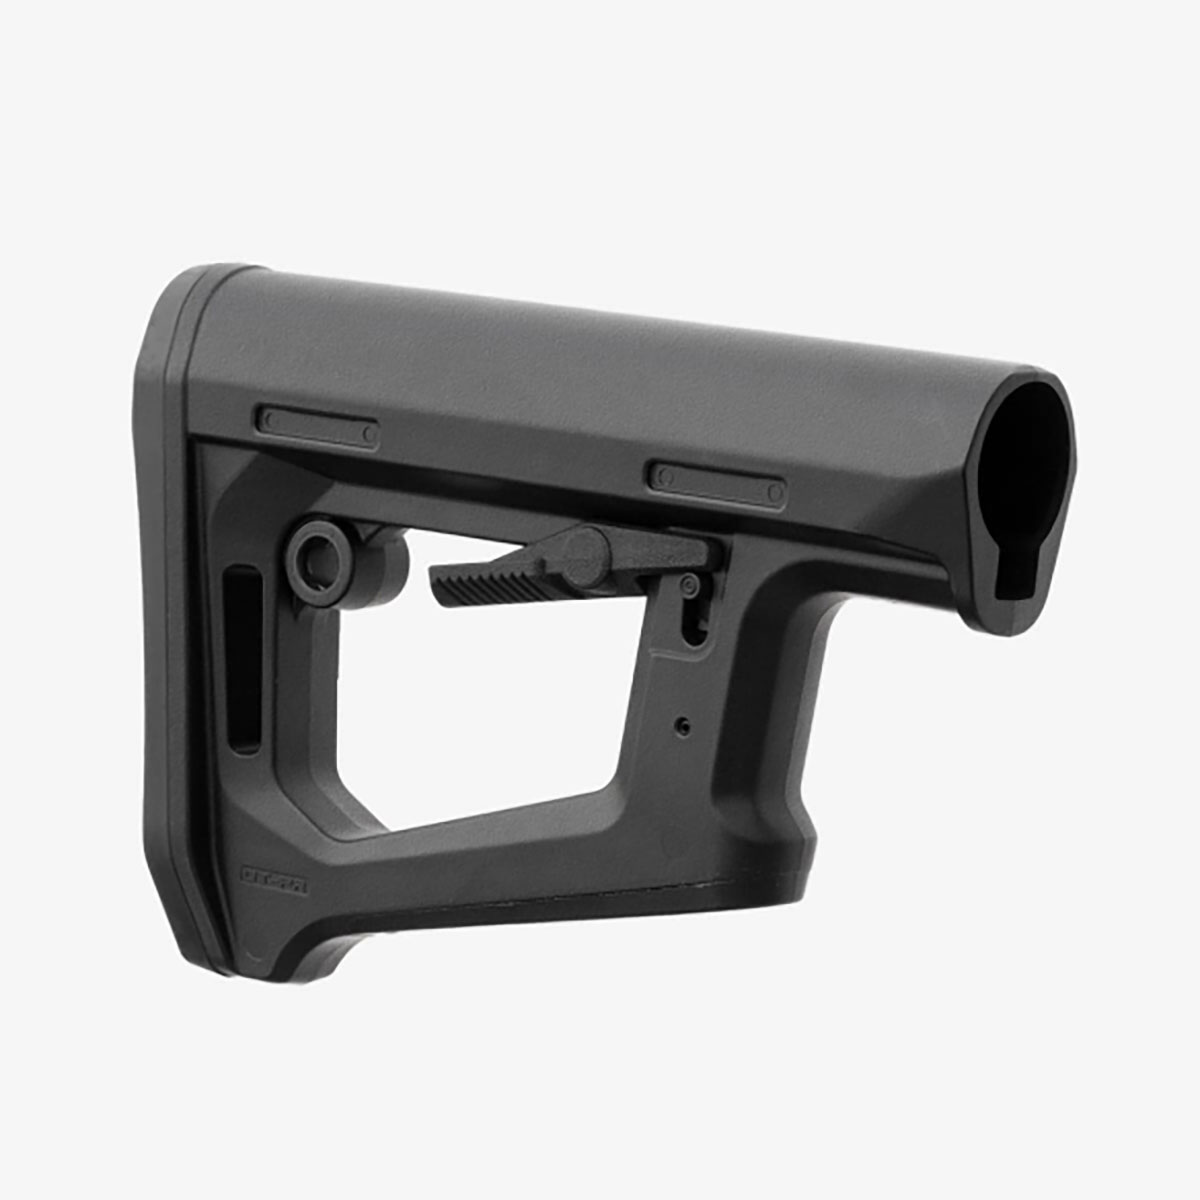 MAGPUL - DT-PR™ COLLAPSIBLE MIL-SPEC CARBINE STOCK FOR AR-15